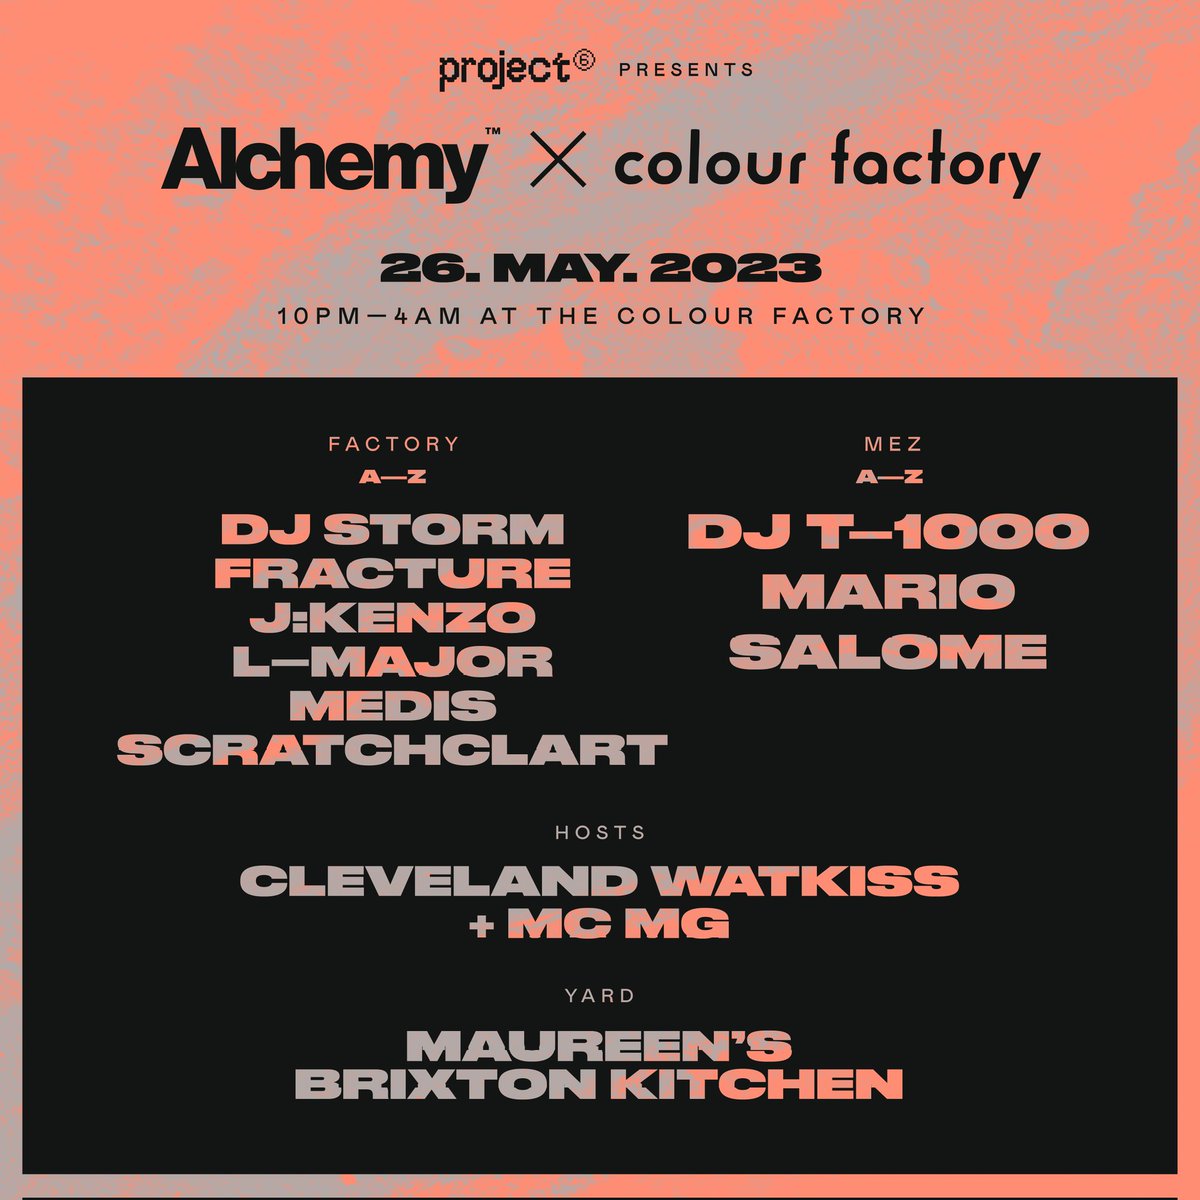 📢 Just 1 week to go until this motley crew of donnies decend on the Factory. Music across the spectrum courtesy of @djstormdnb @alan_oldham @CharlieFracture @JKenzo @ScratchaDVA @L_Major @CleveWatkiss + more 🥁🥁 50% Flash Sale now on 👇🏽 ra.co/events/1677088…